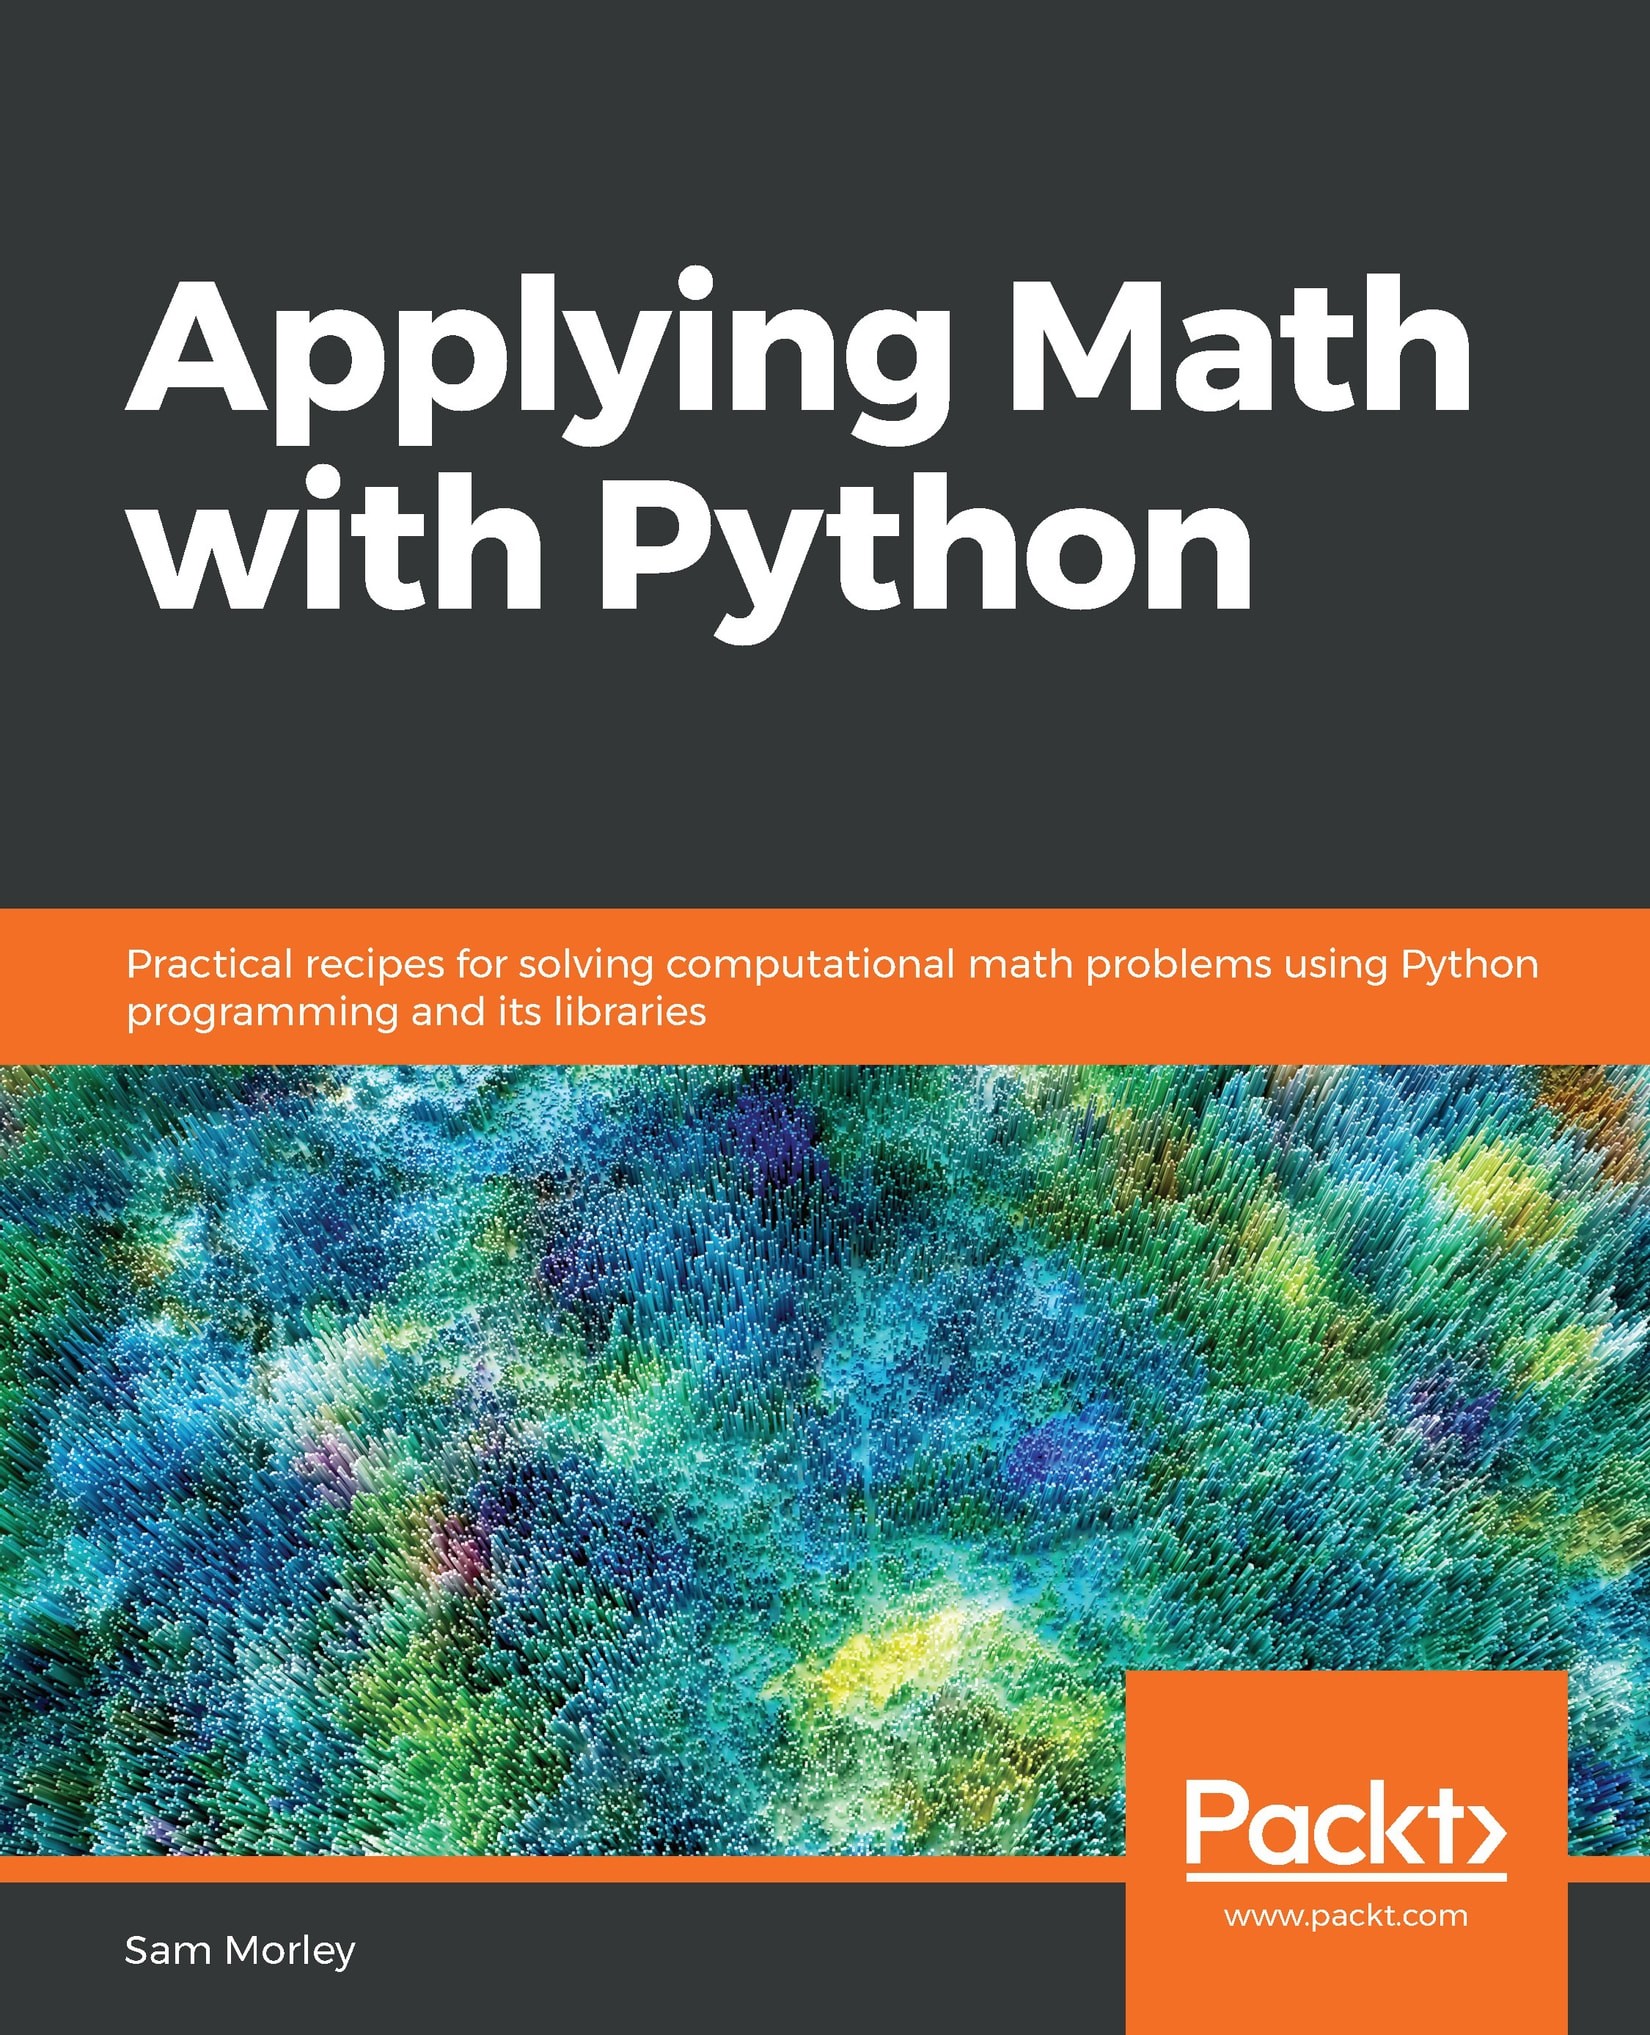 Applying Math With Python: Practical Recipes for Solving Computational Math Problems Using Python Programming and Its Libraries